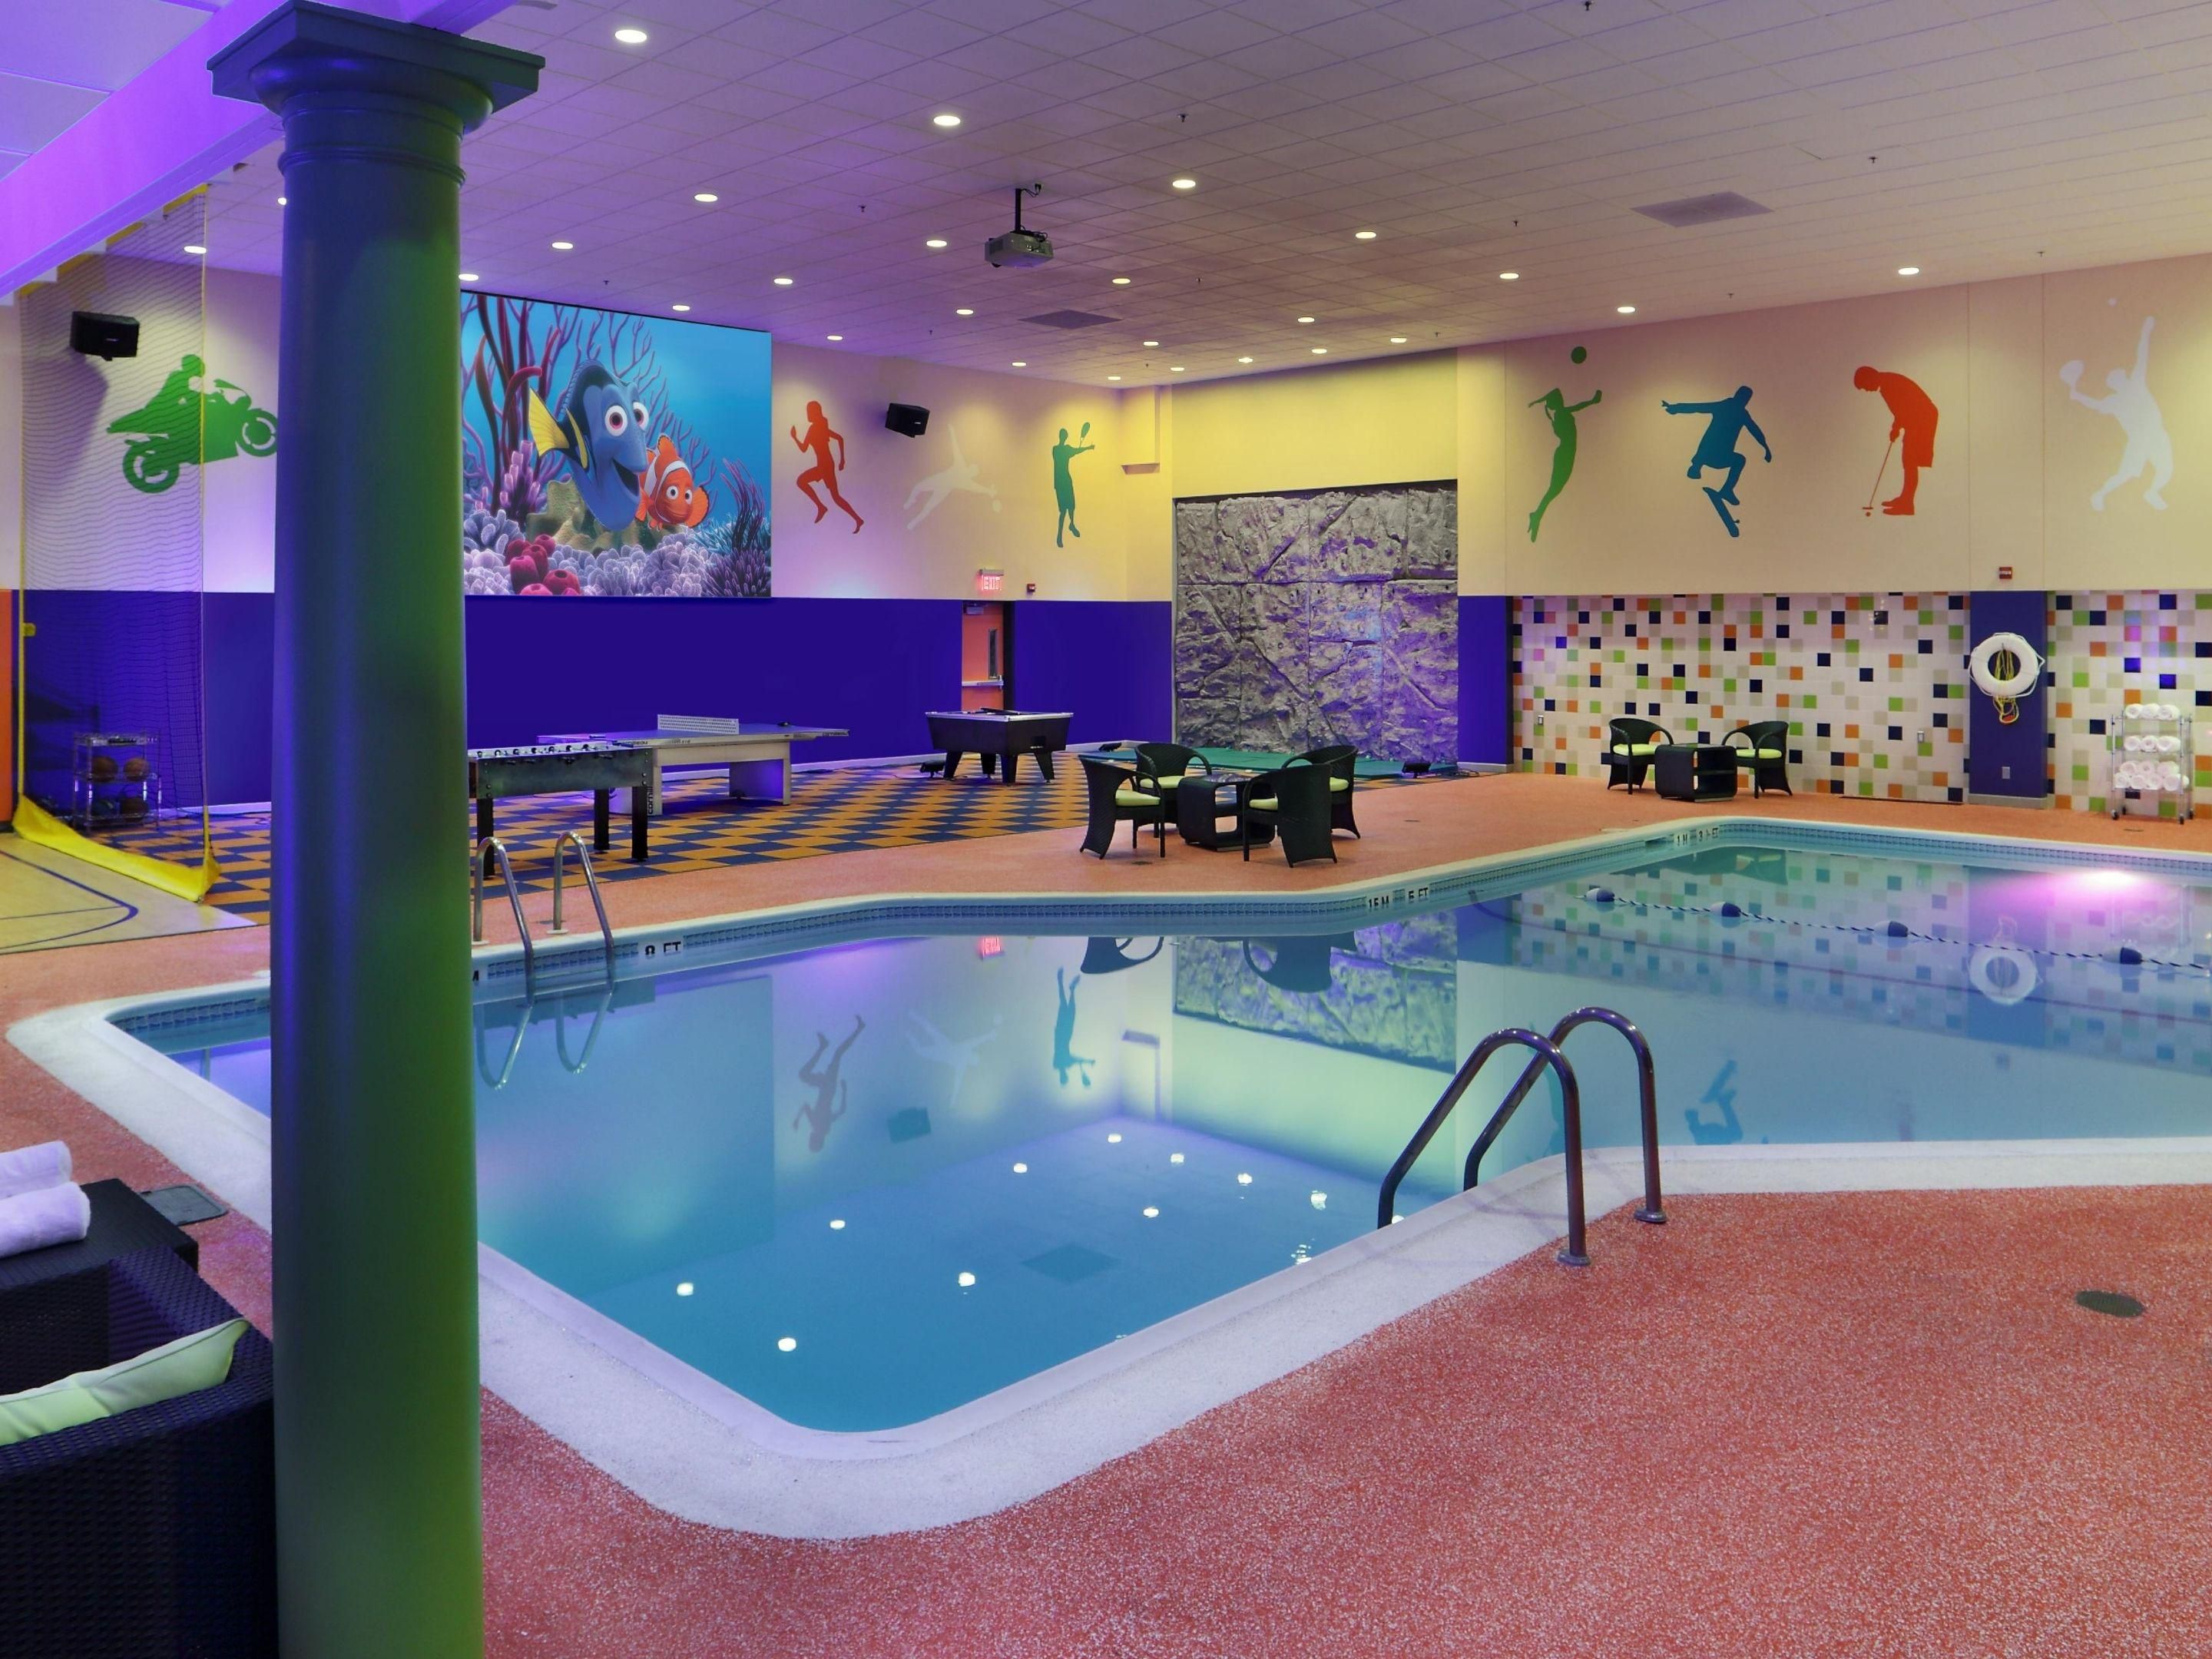 Traveling with the family to Boston for winter, spring, or Easter break? Dive into a world of aquatic fun at our heated indoor pool and sports deck. Catch “dive-in” movies on a 16-foot screen every Friday and Saturday. Explore new heights on our rock-climbing wall and enjoy ping-pong, bumper pool, and a free-throw basketball court.